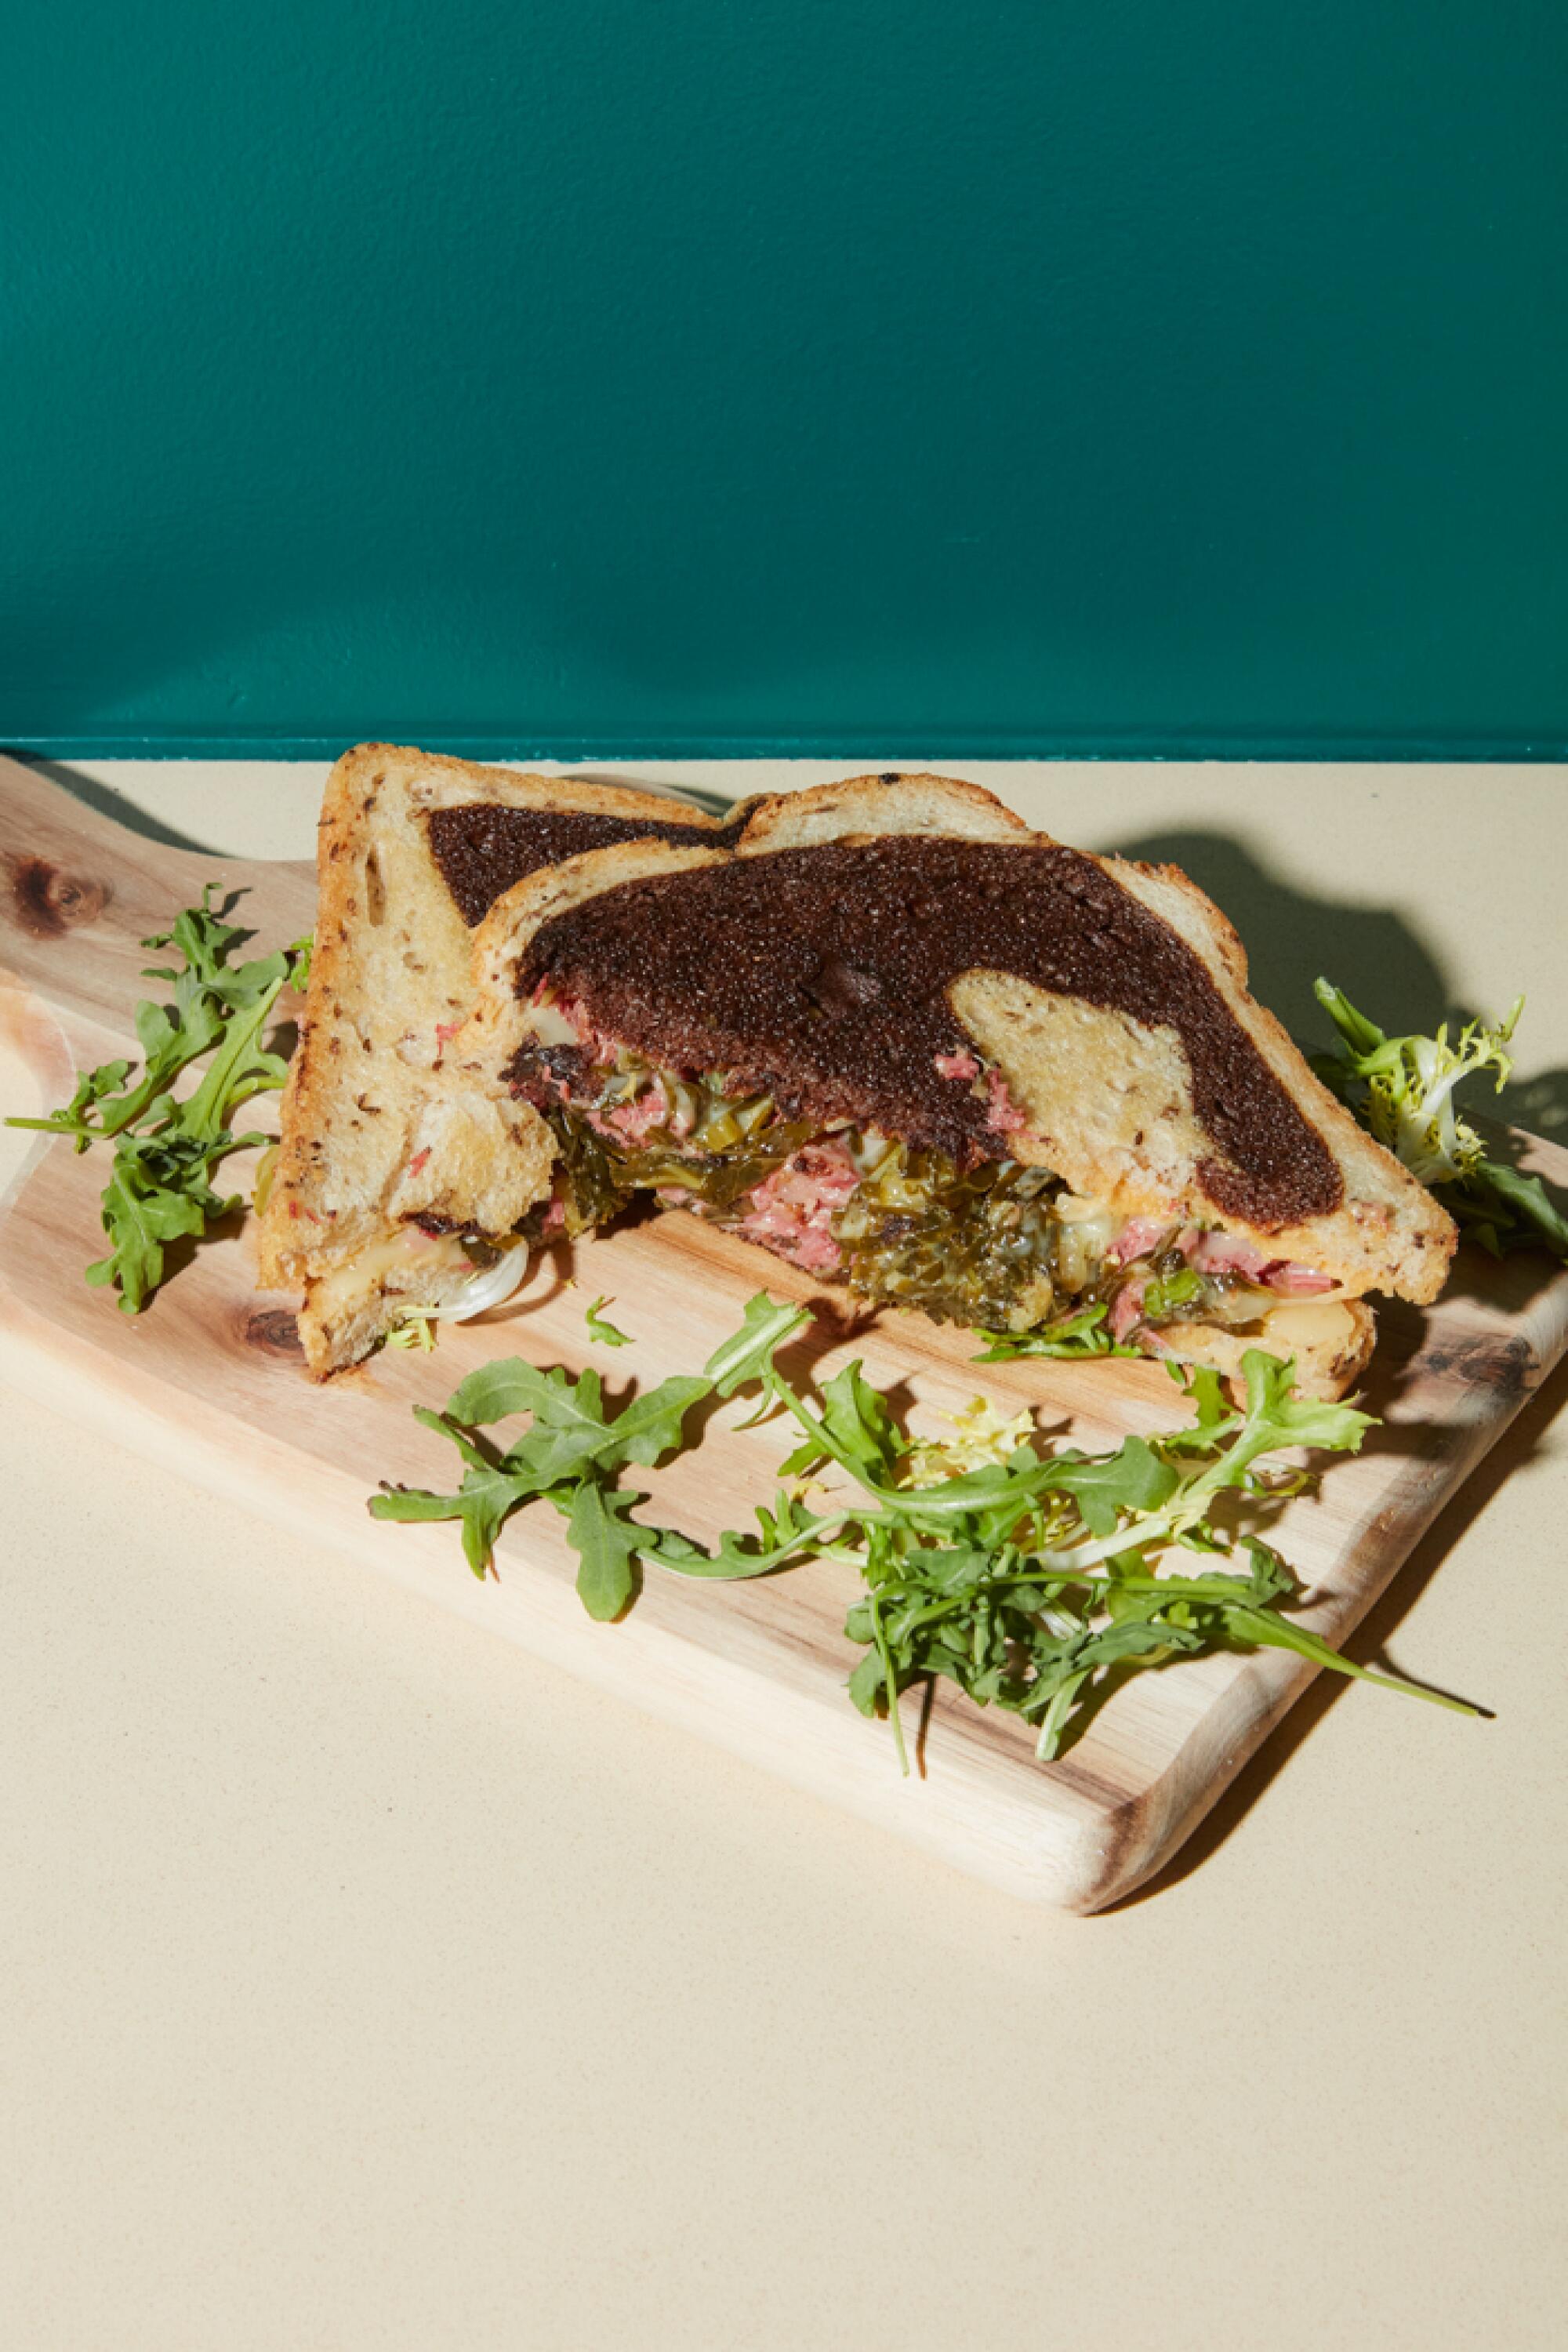 A pastrami sandwich on marbled rye against a green wall